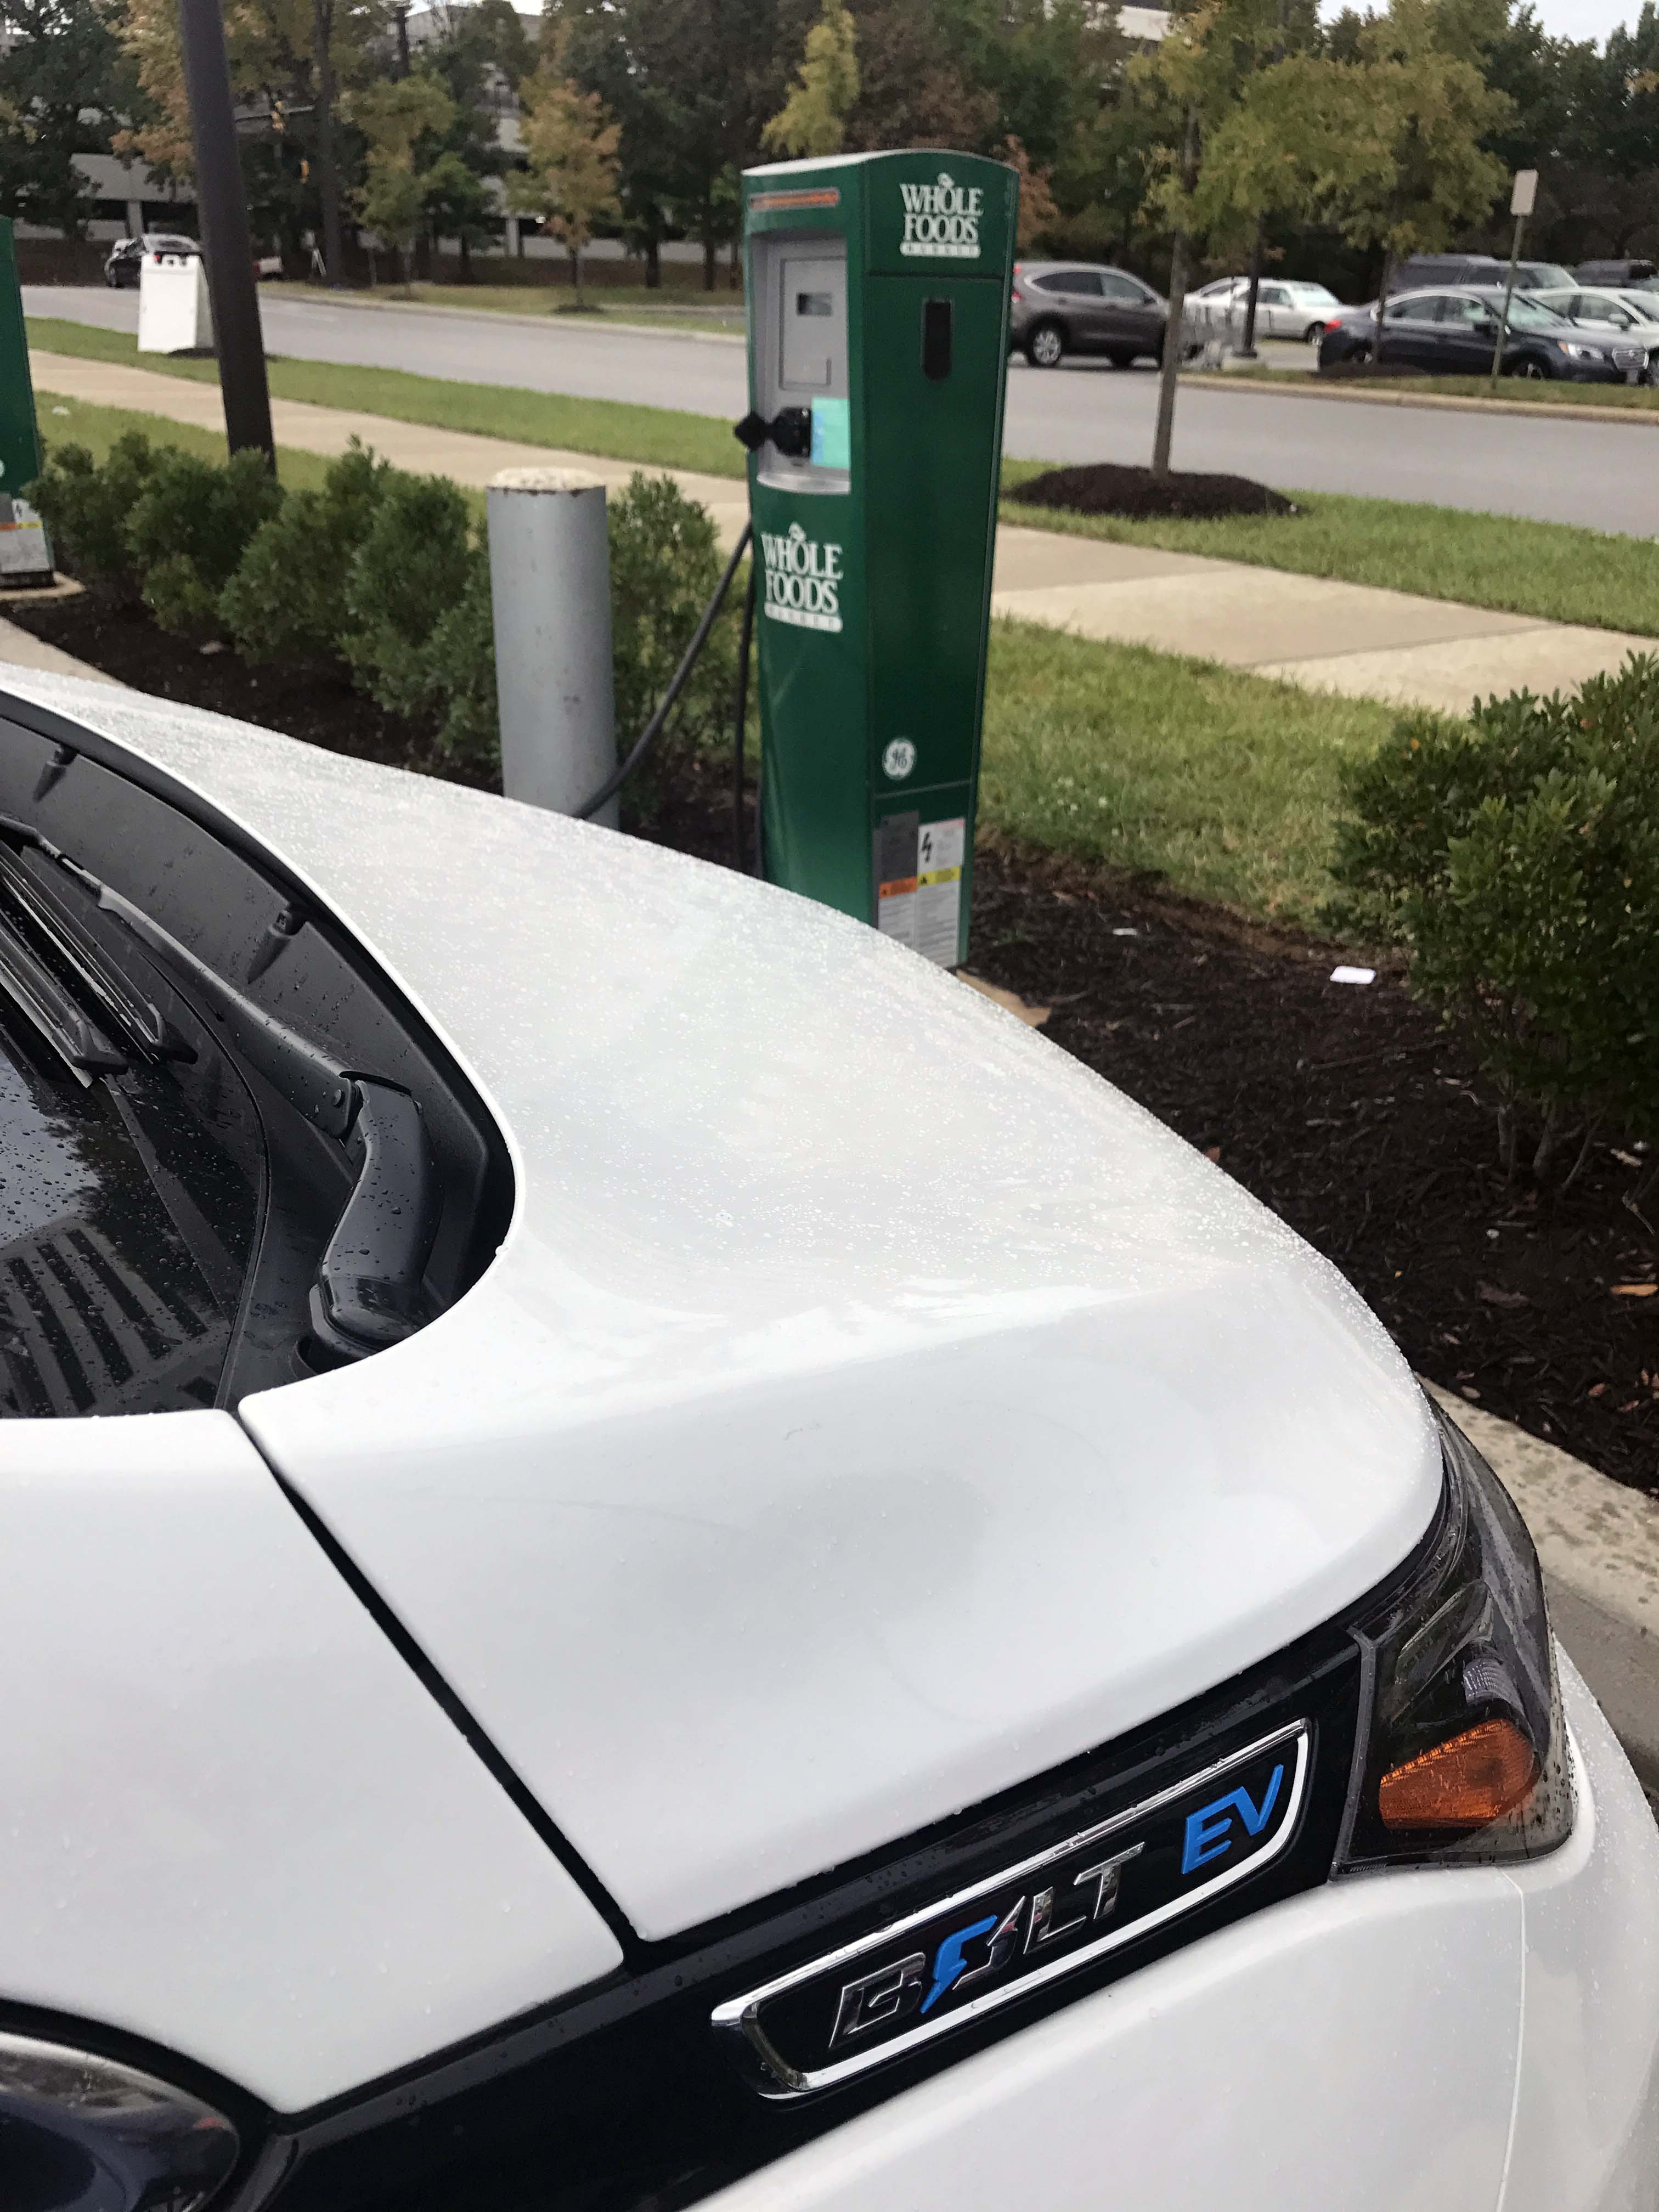 electric vehicle charging station at Whole Foods in Columbia,MD